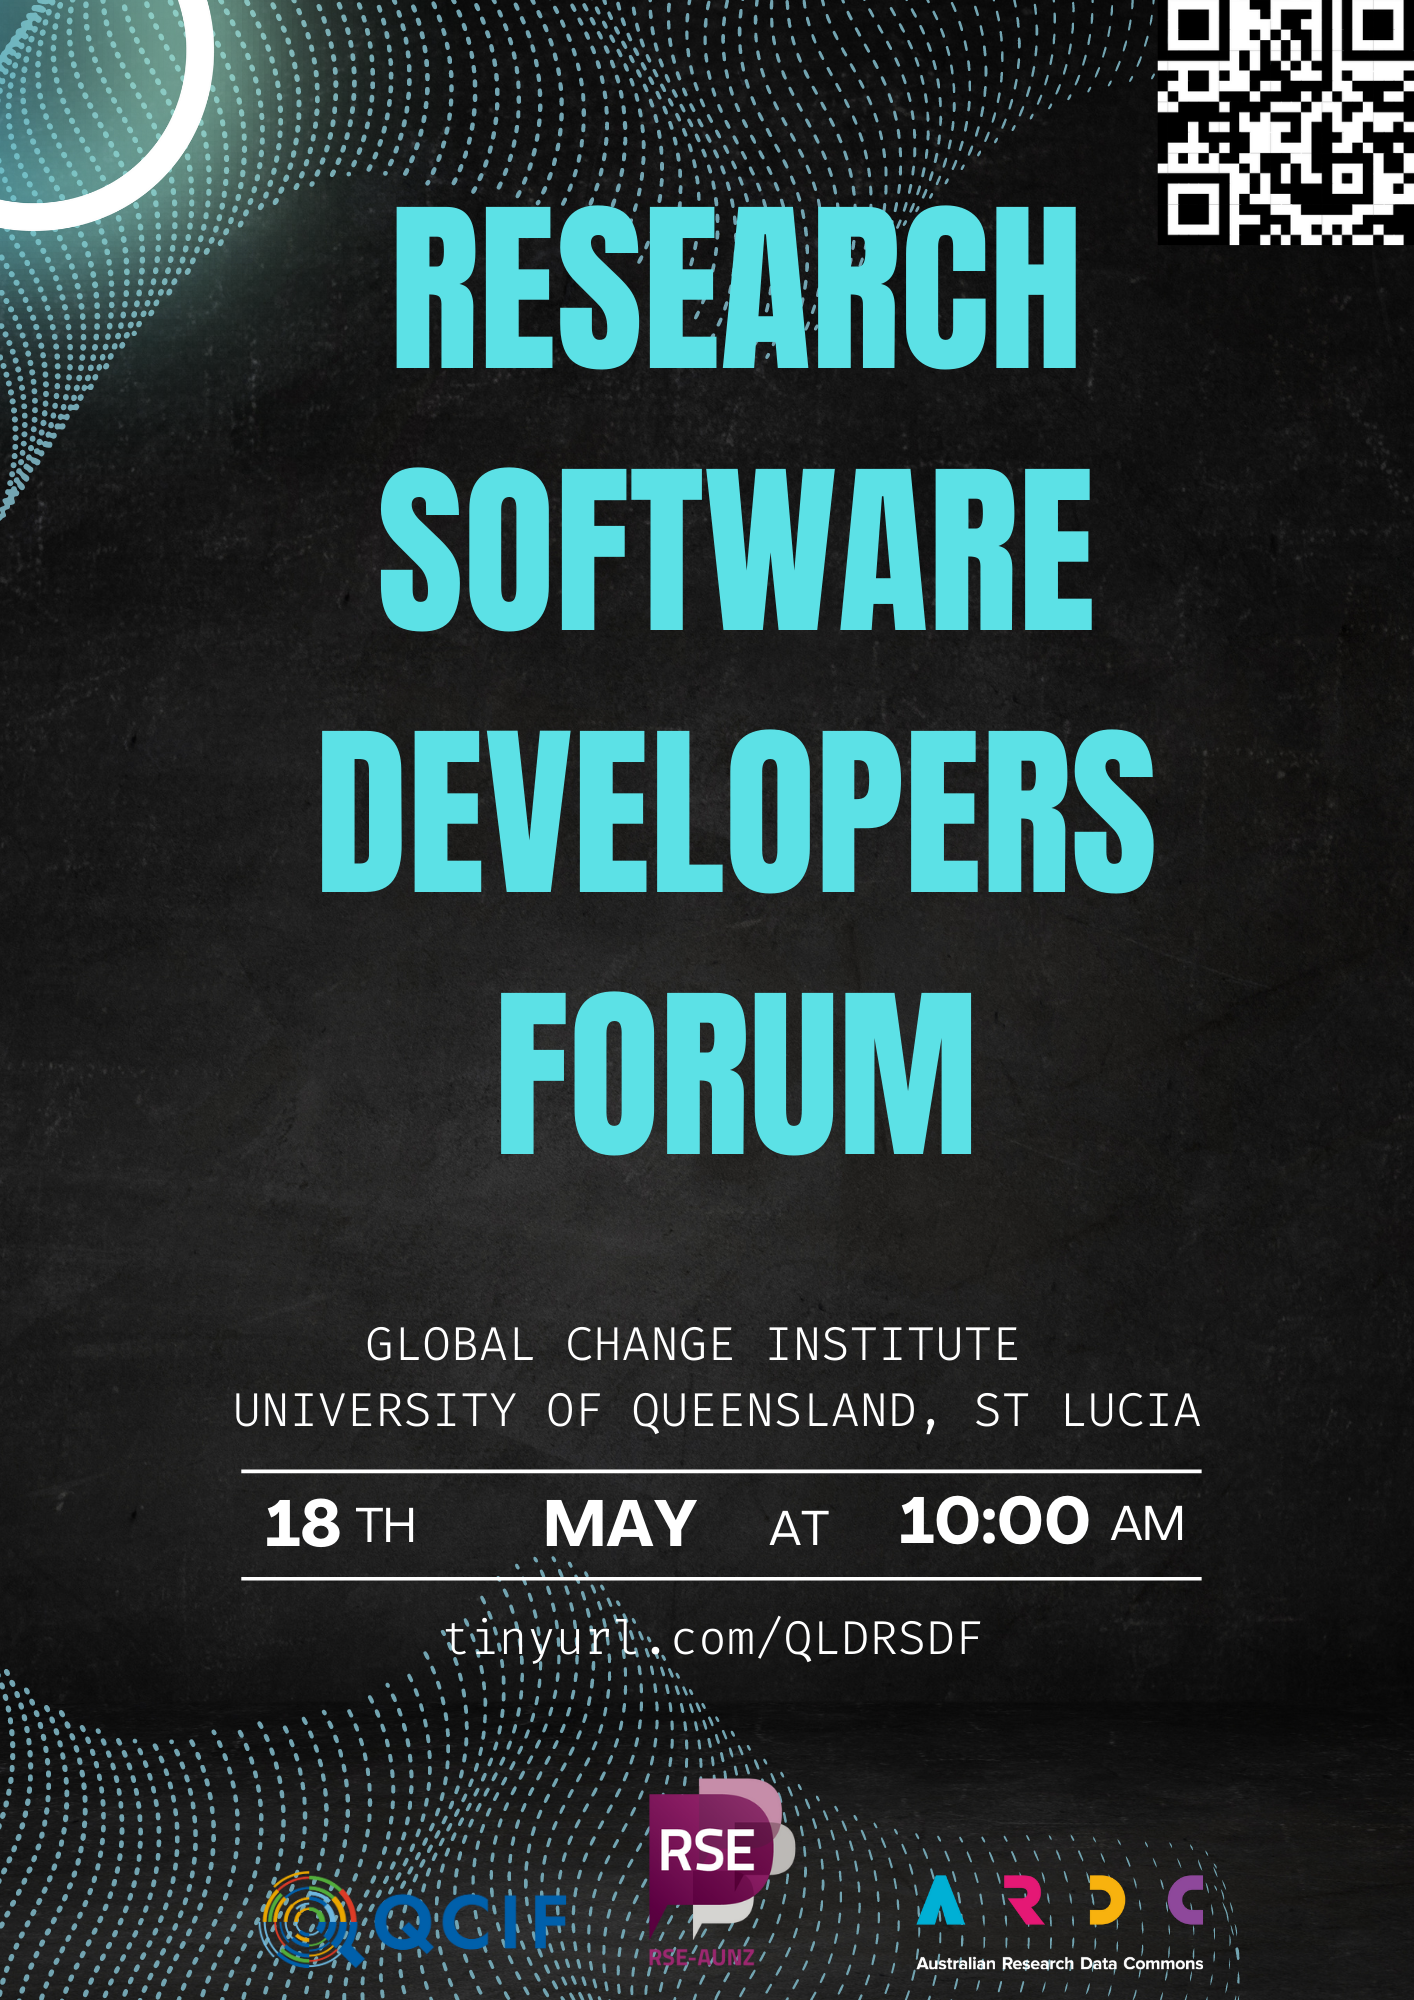 Research Software Developers Forum on 18th May